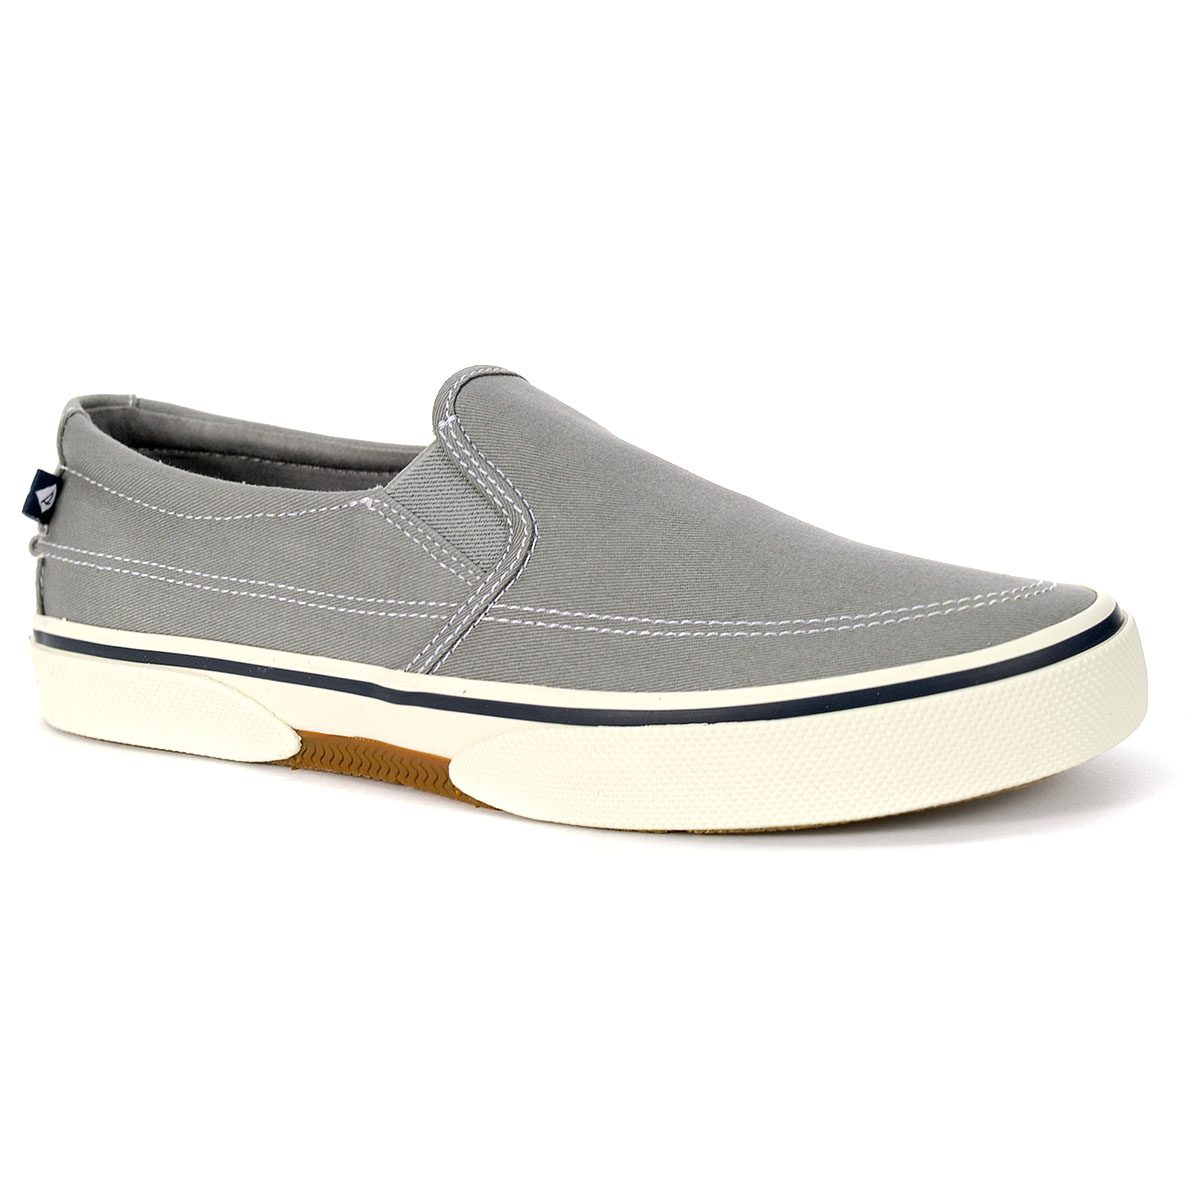 Sperry Top-Sider Men's Halyard Grey Slip-On Shoes STS22099 - WOOKI.COM